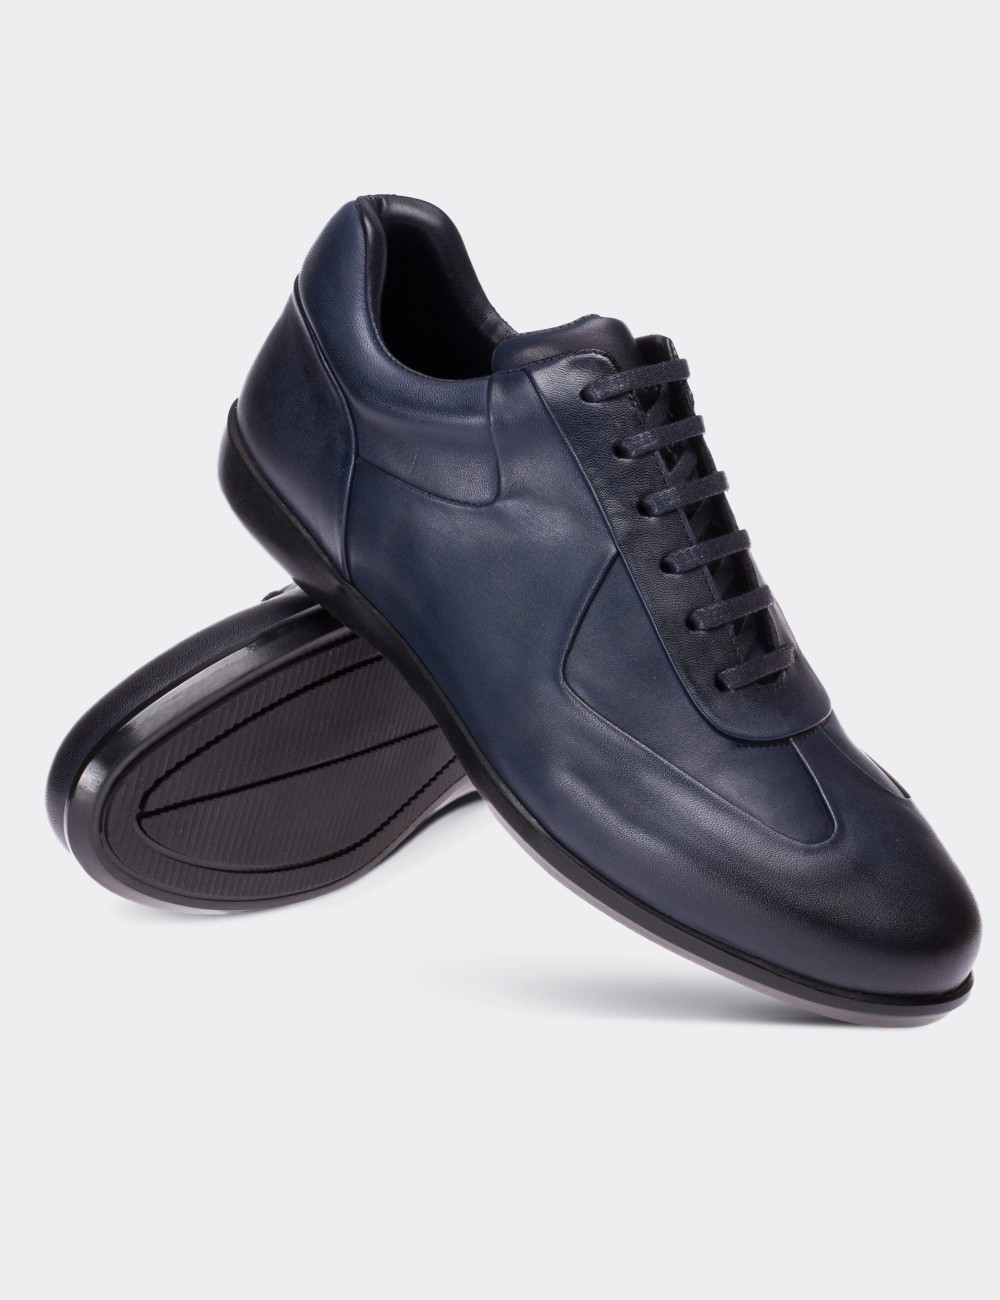 Navy  Leather Lace-up Shoes - 01734MLCVC01